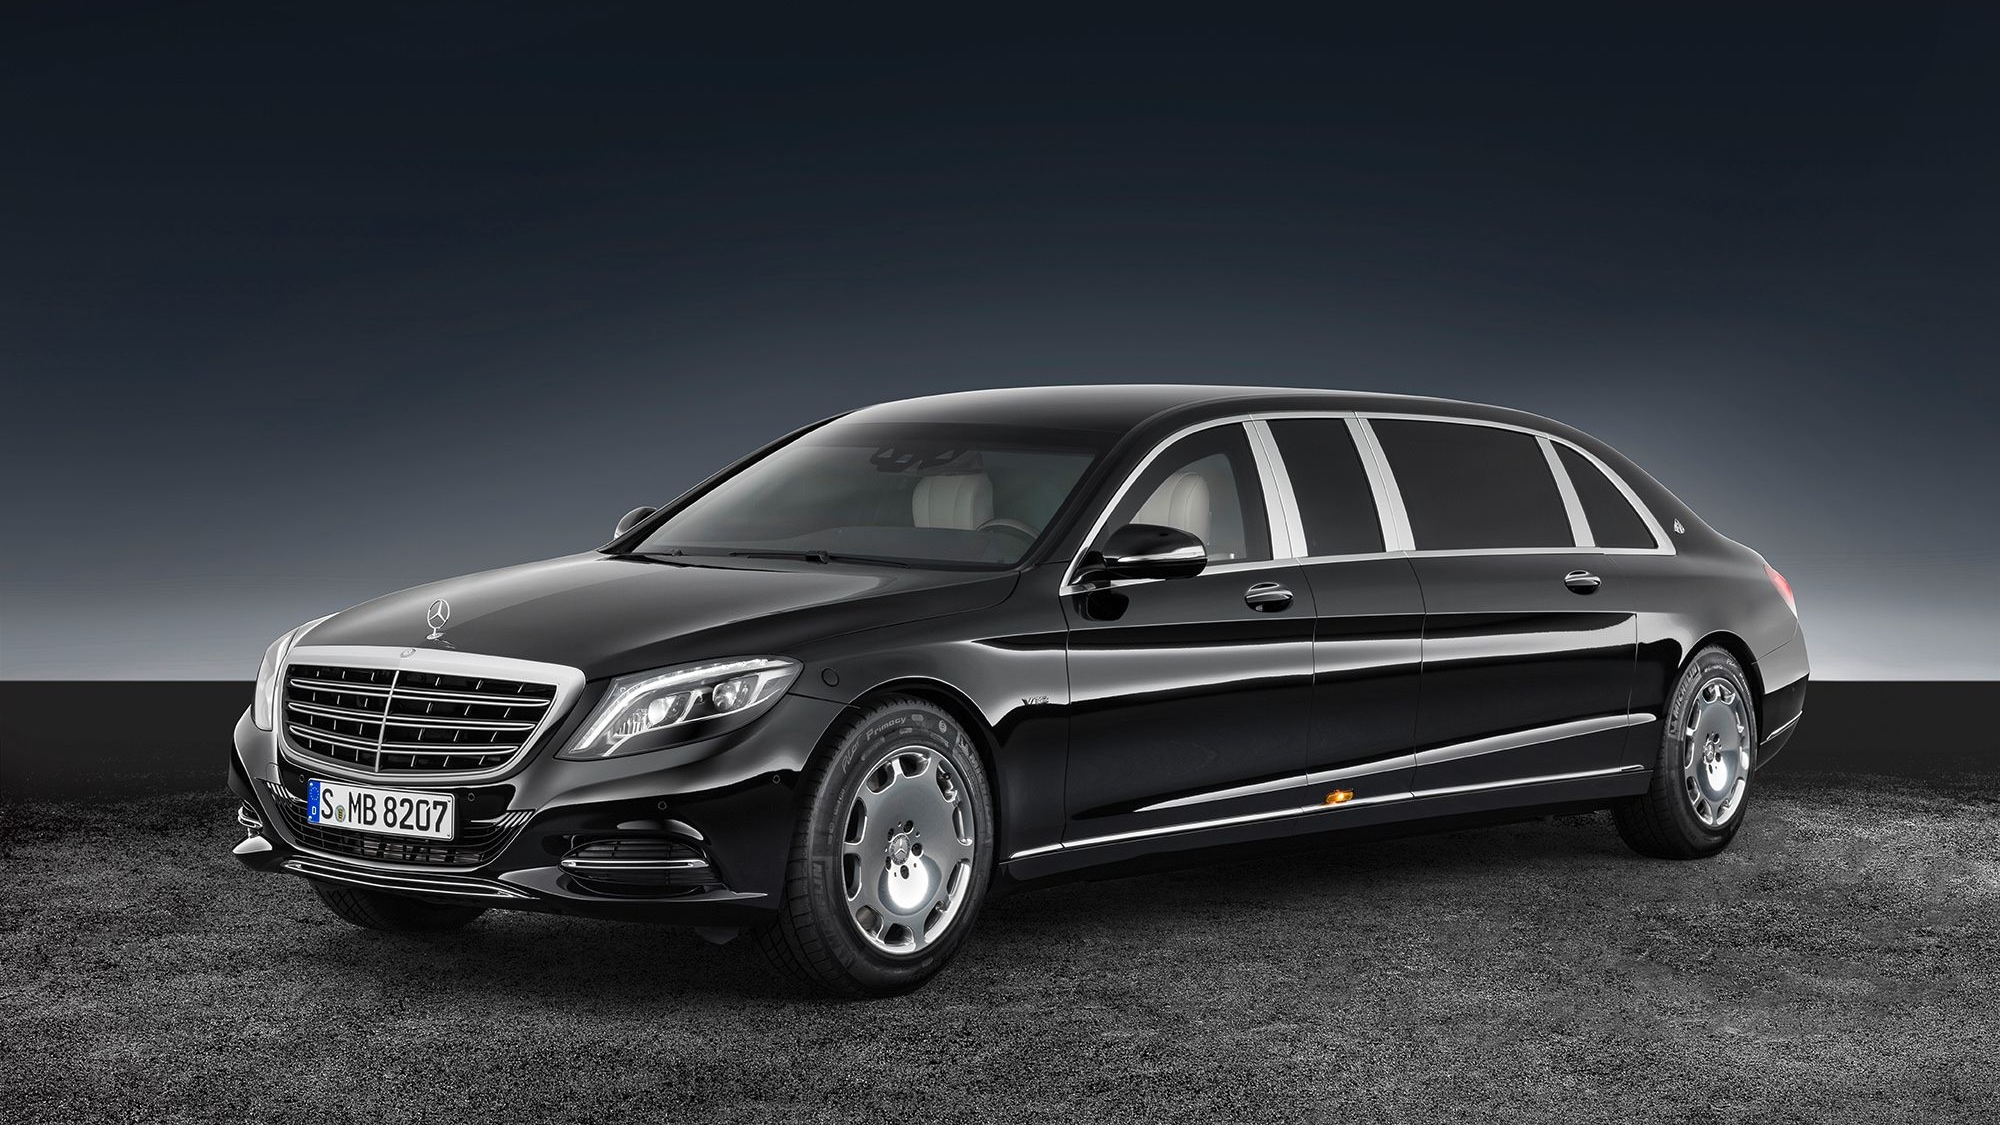 Mercedes Maybach S600 Pullman Guard Is A Glorious And Tough Limo